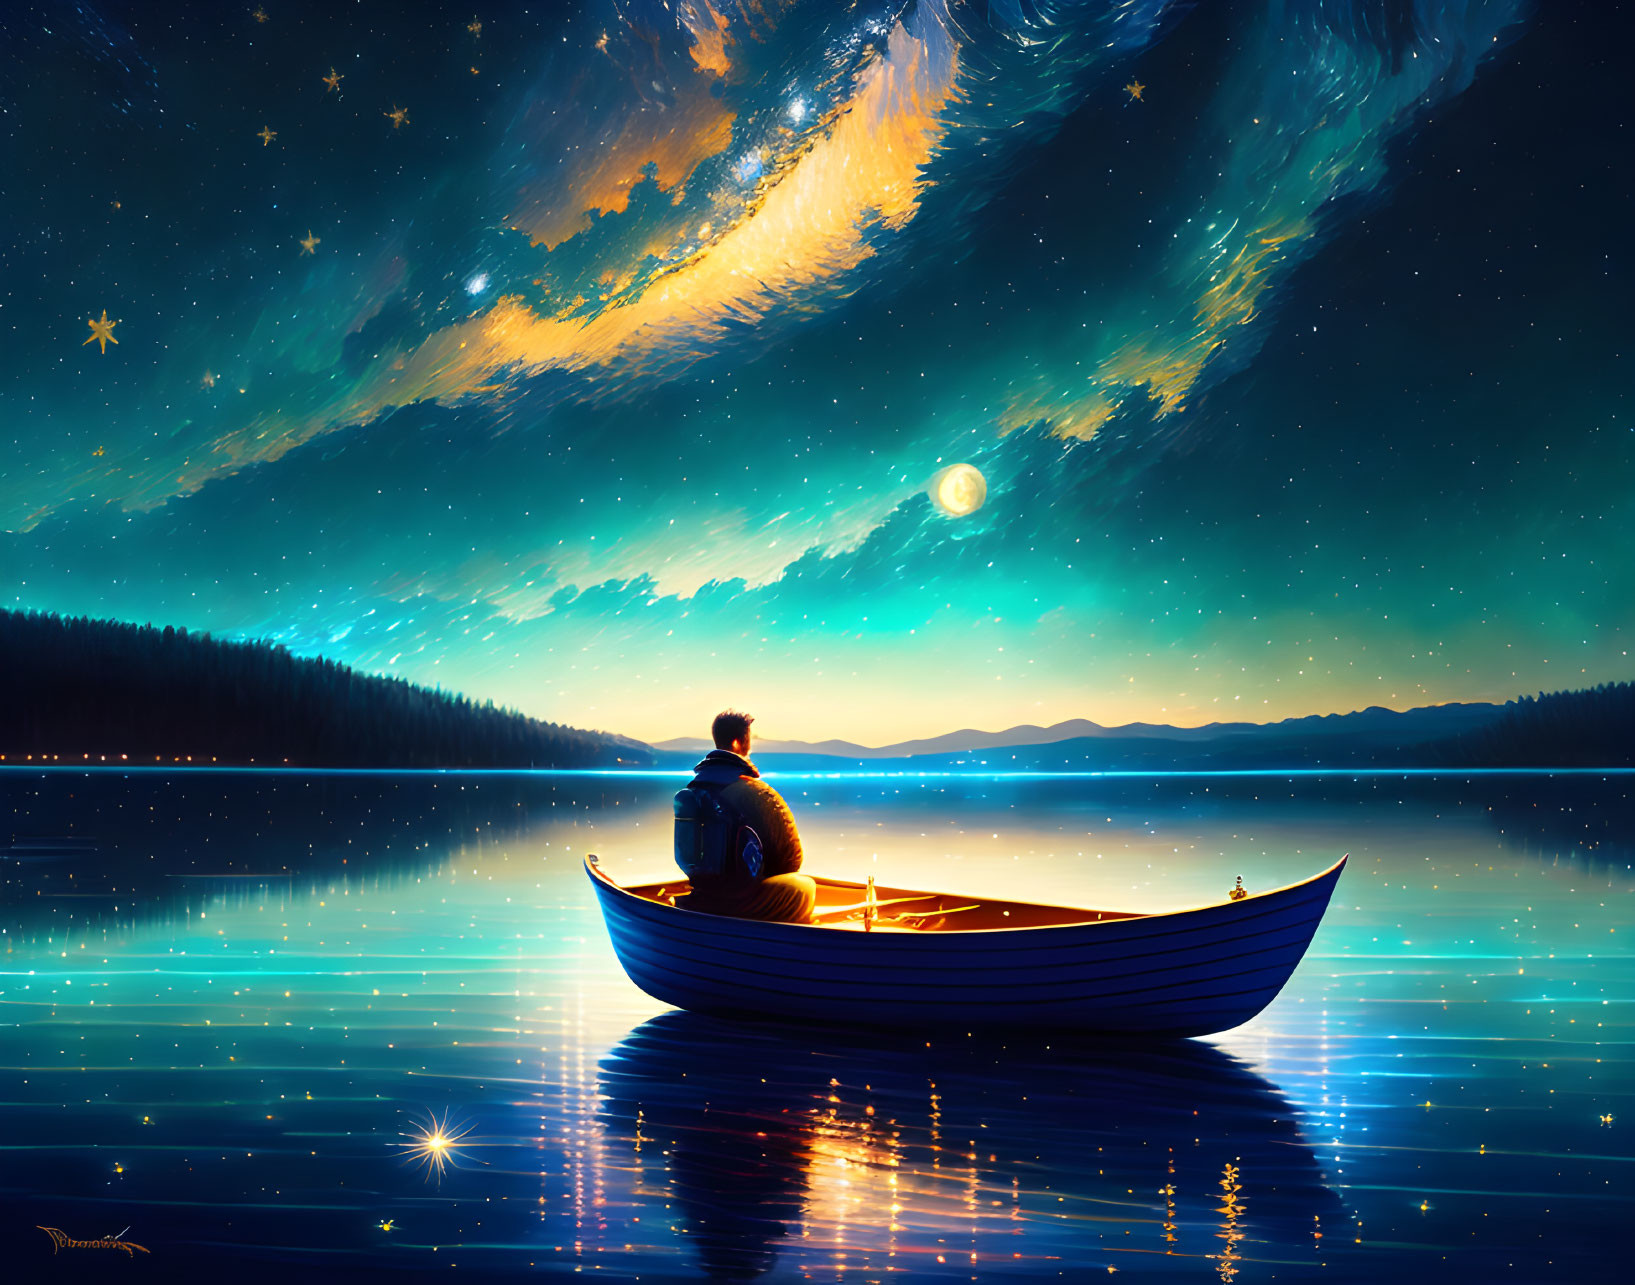 Person in boat admiring starry night sky over calm lake